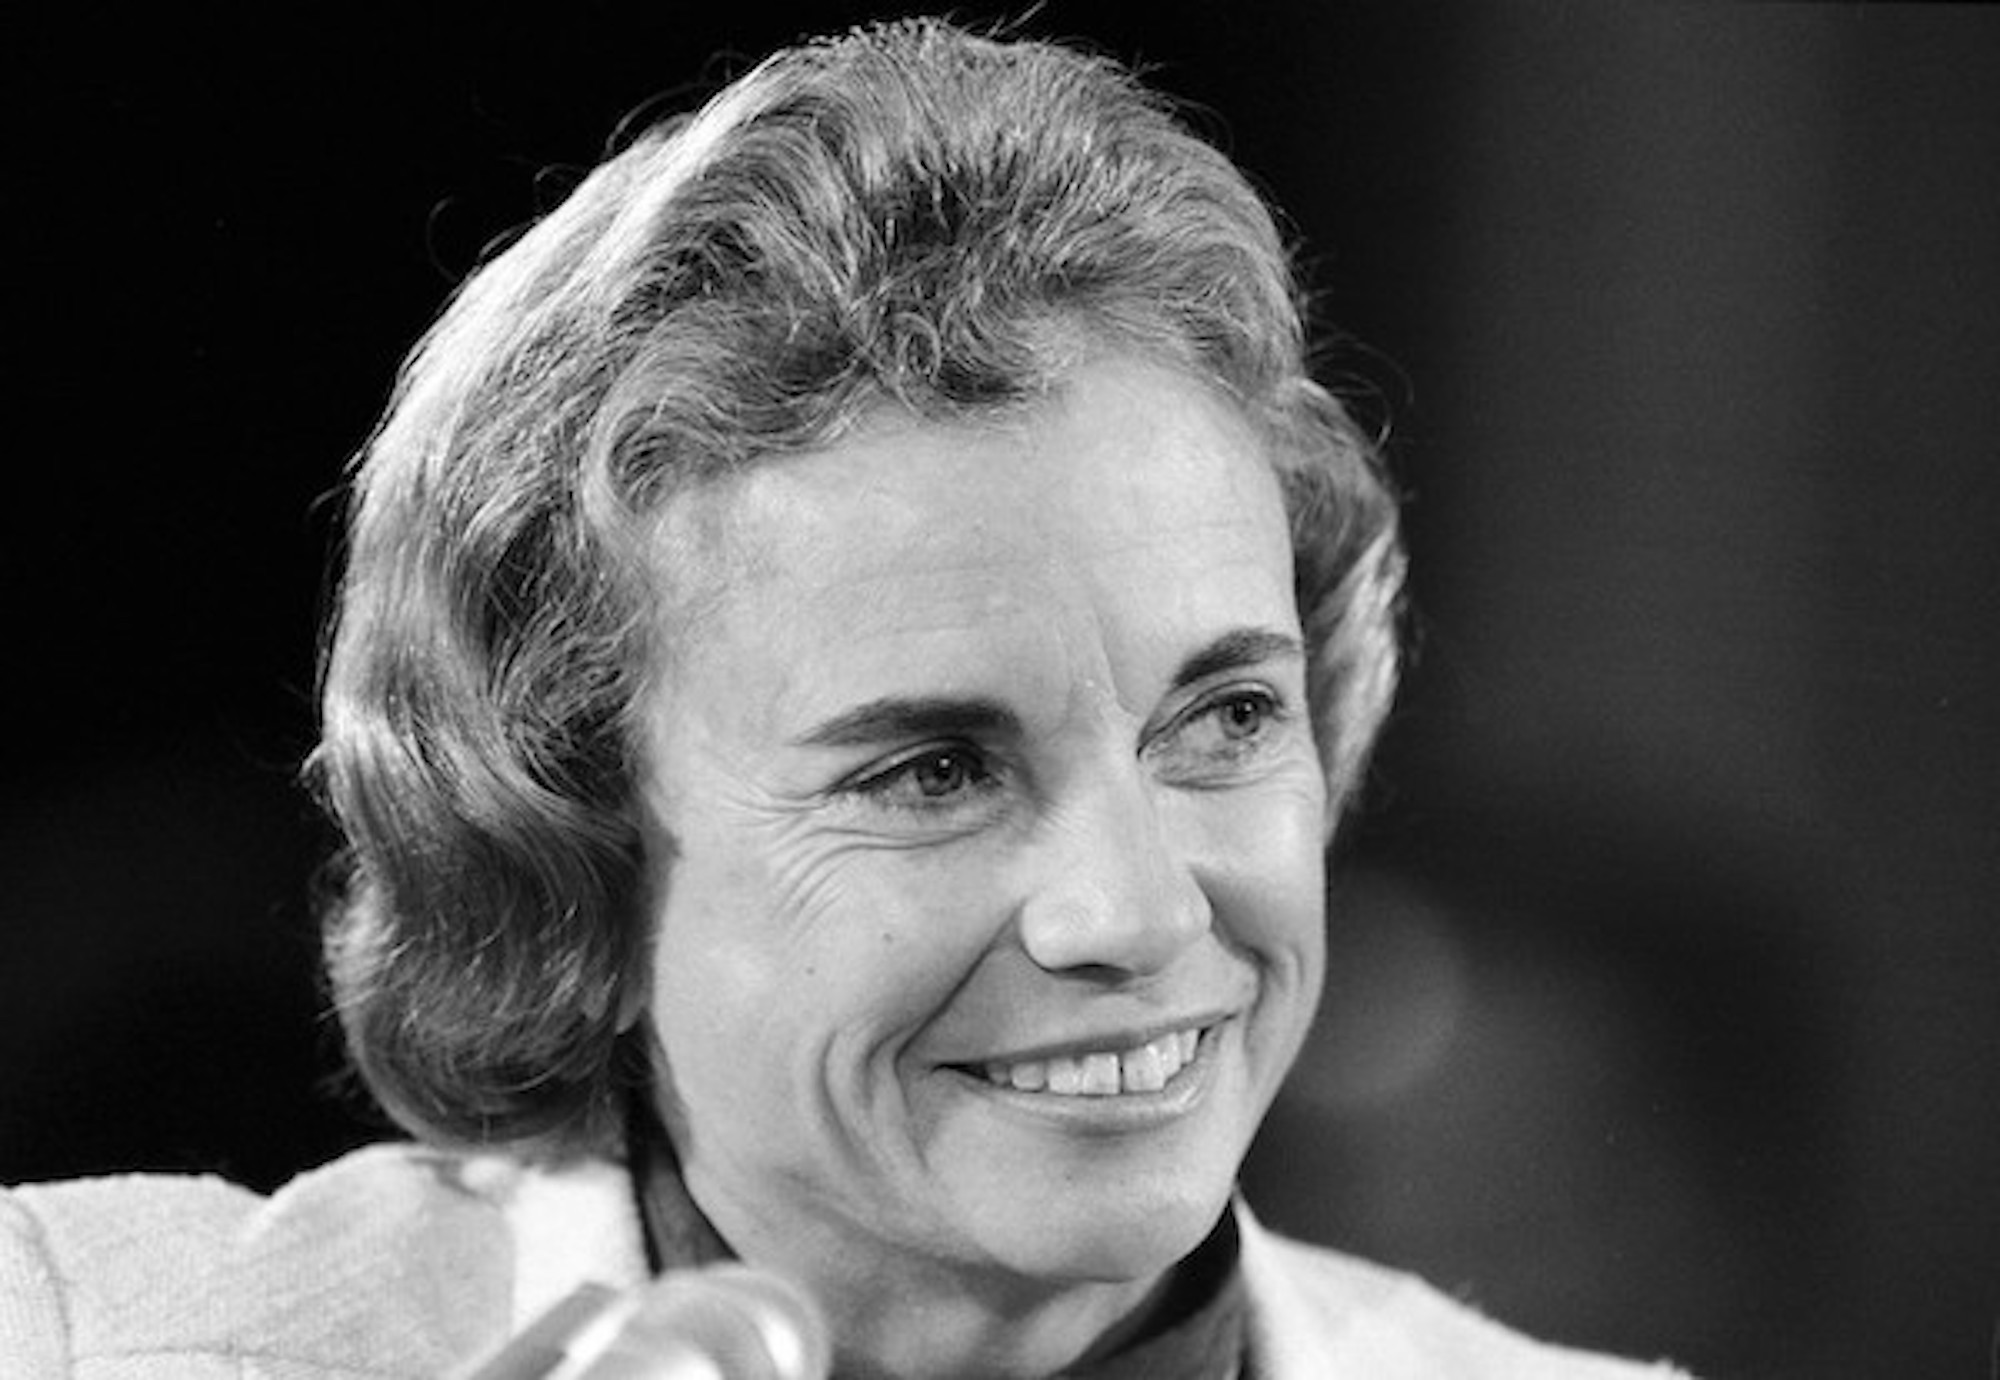 Black and white photo of Justice Sandra Day O'Connor from the 1980s.